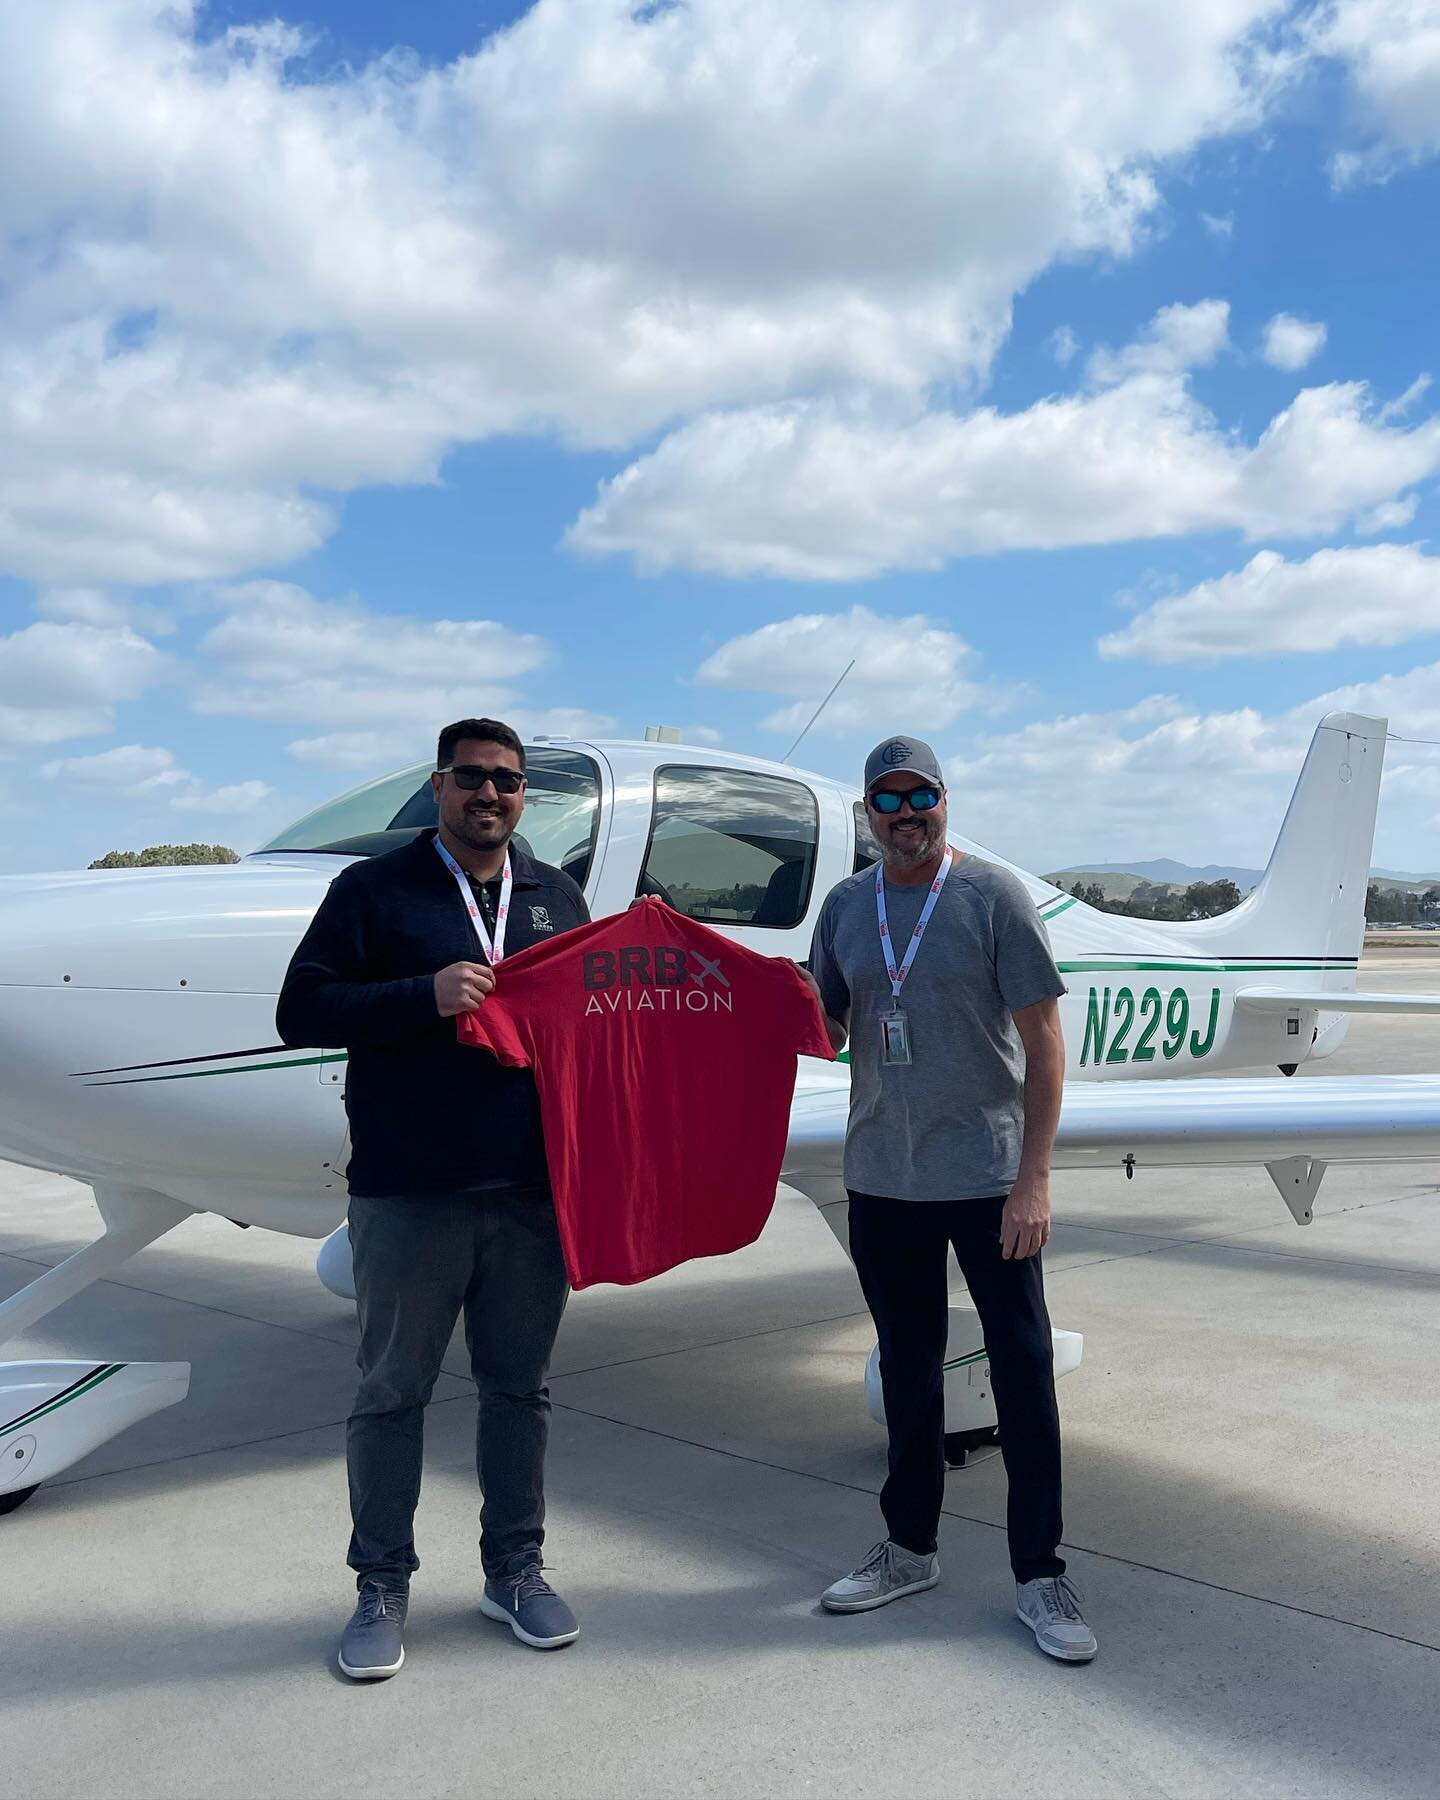 Say hello to the world&rsquo;s newest Private Pilot! Congratulations to Brian on completing BRB&rsquo;s PPL training program and passing his checkride this morning!

#brbaviation #learntobrb #privatepilot#cirrusaircraft #cirrus #aviation #flying #cir